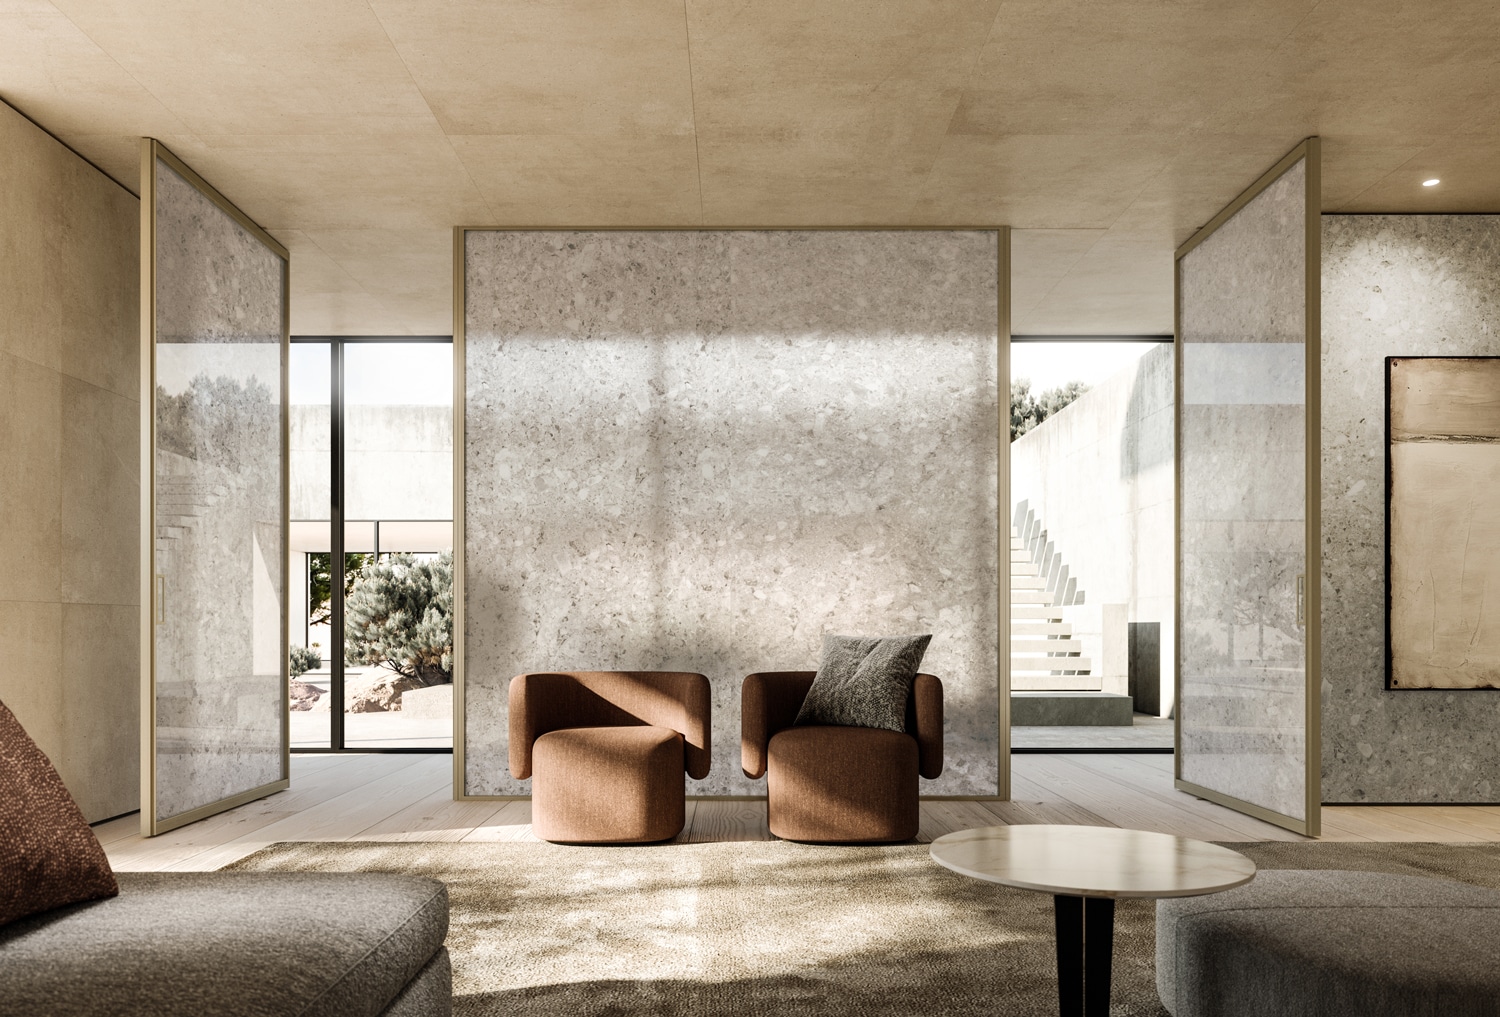 One of our newest decorations, Ceppo di Gré reproduces the look of a sedimentary stone typical of the Lake Iseo area of Italy. It has a bright grey color featuring sediments in lighter and darker shades. Glass and light give a new interpretation of this material.